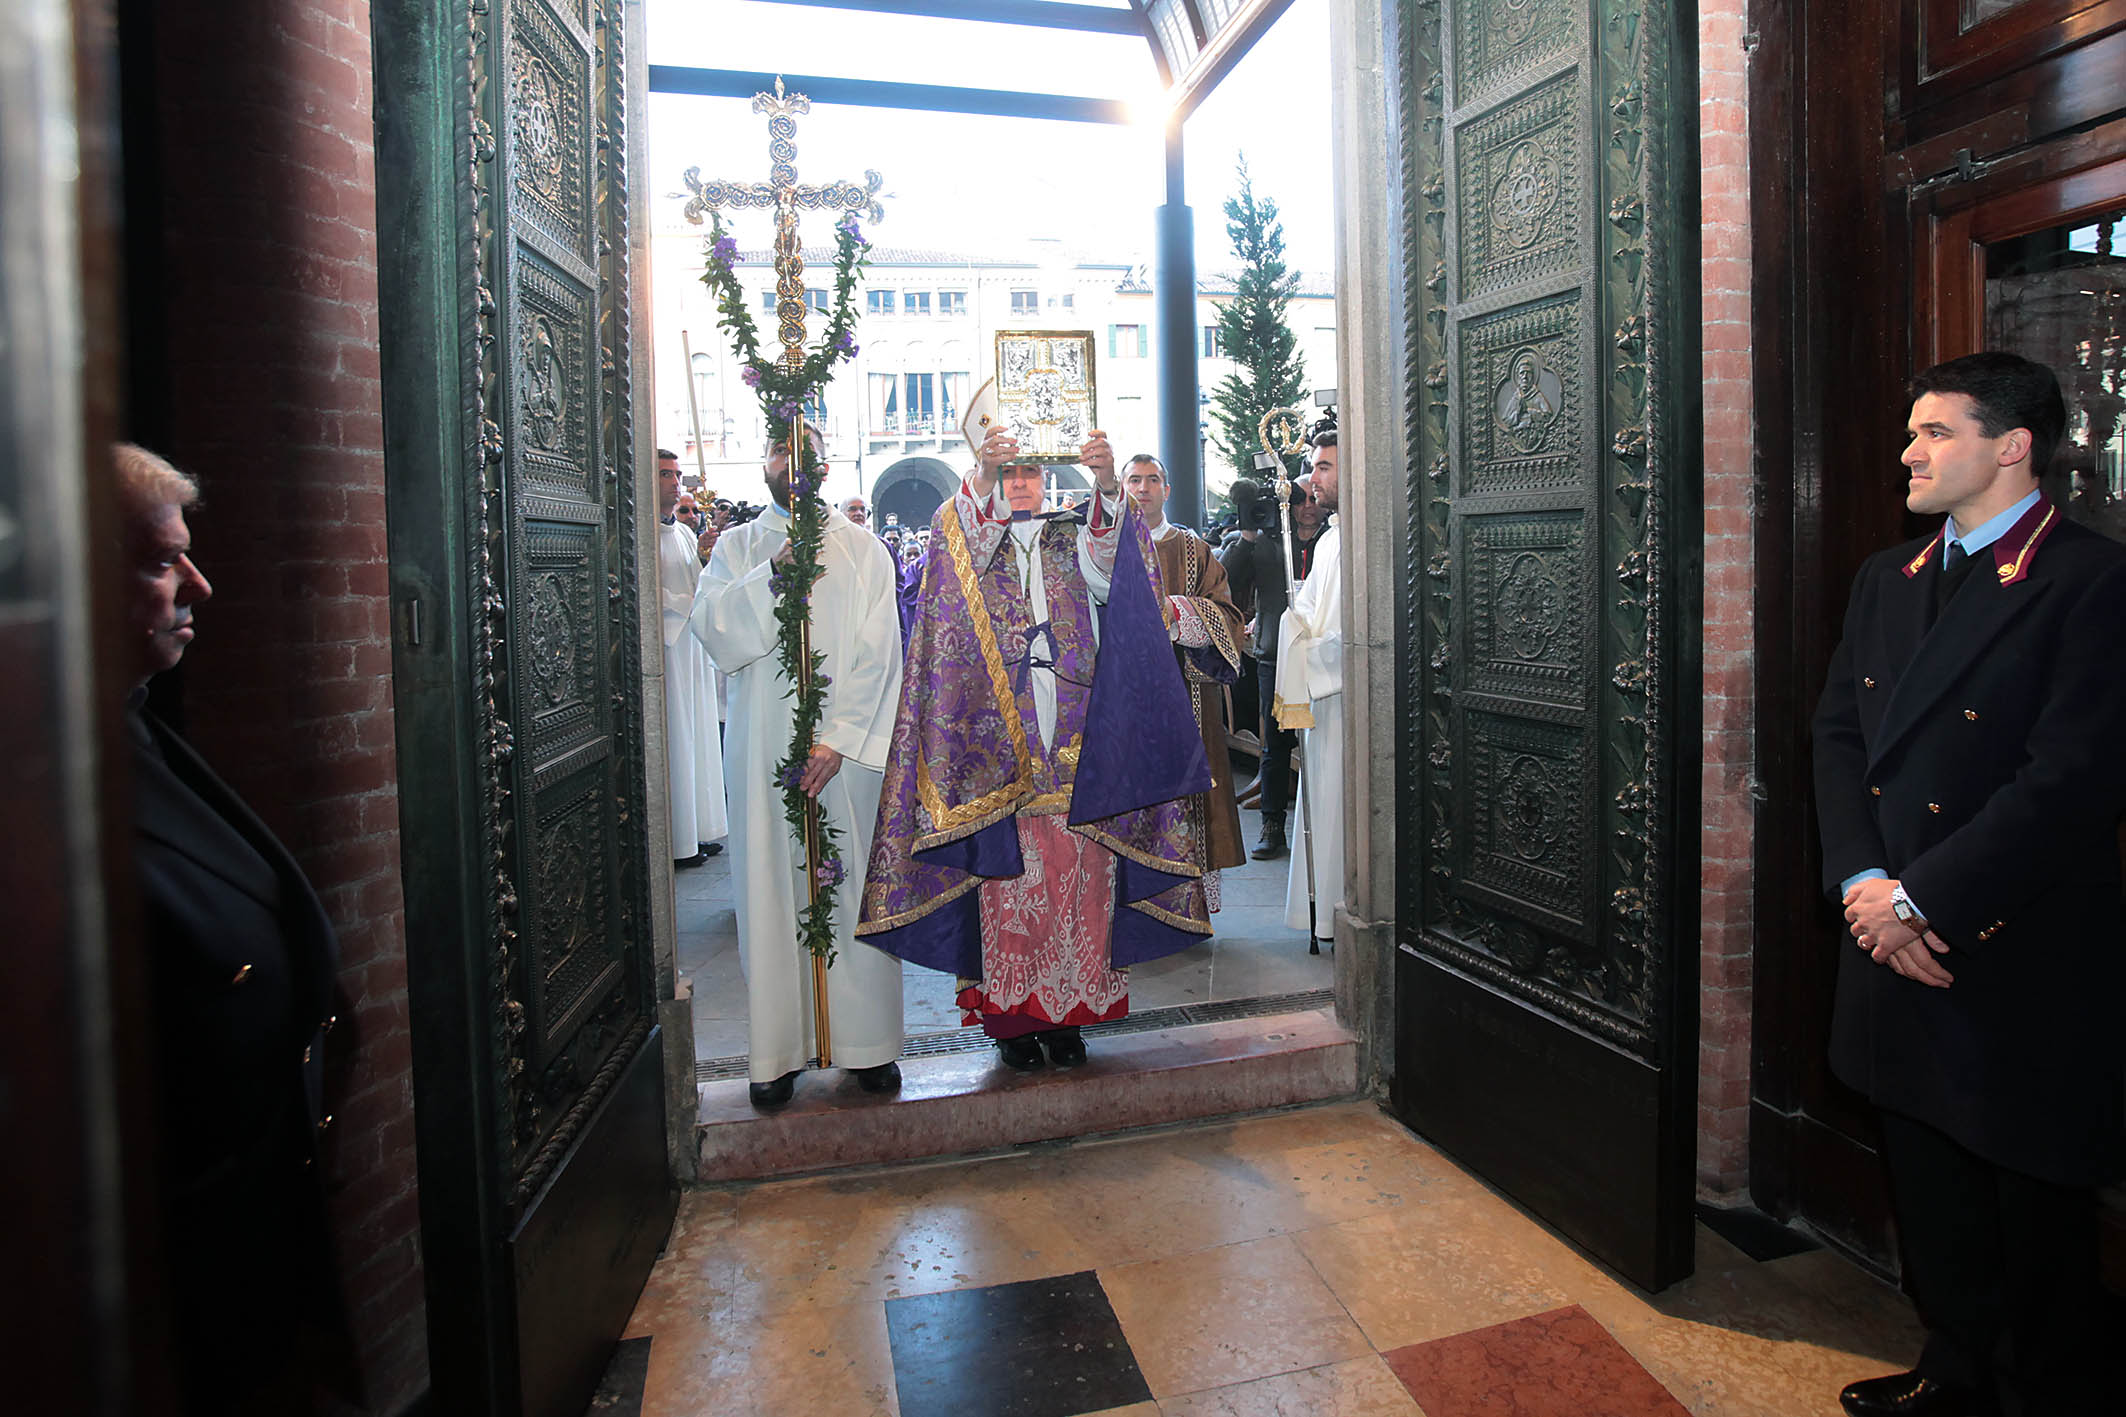 Opening of Holy Door in Saint Anthony's basilica in Padua